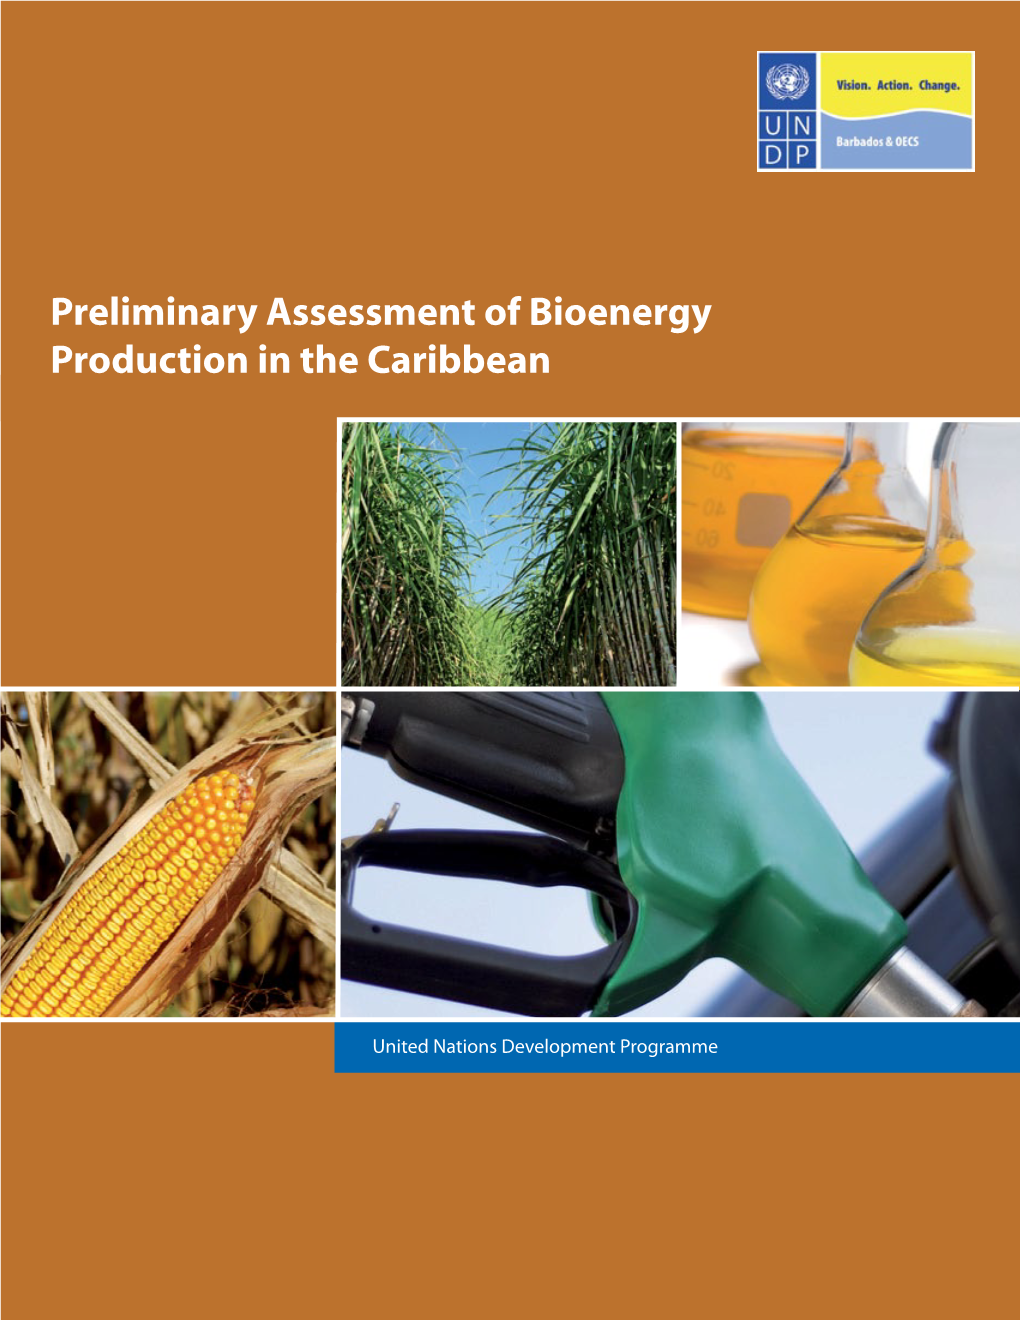 Preliminary Assessment of Bioenergy Production in the Caribbean